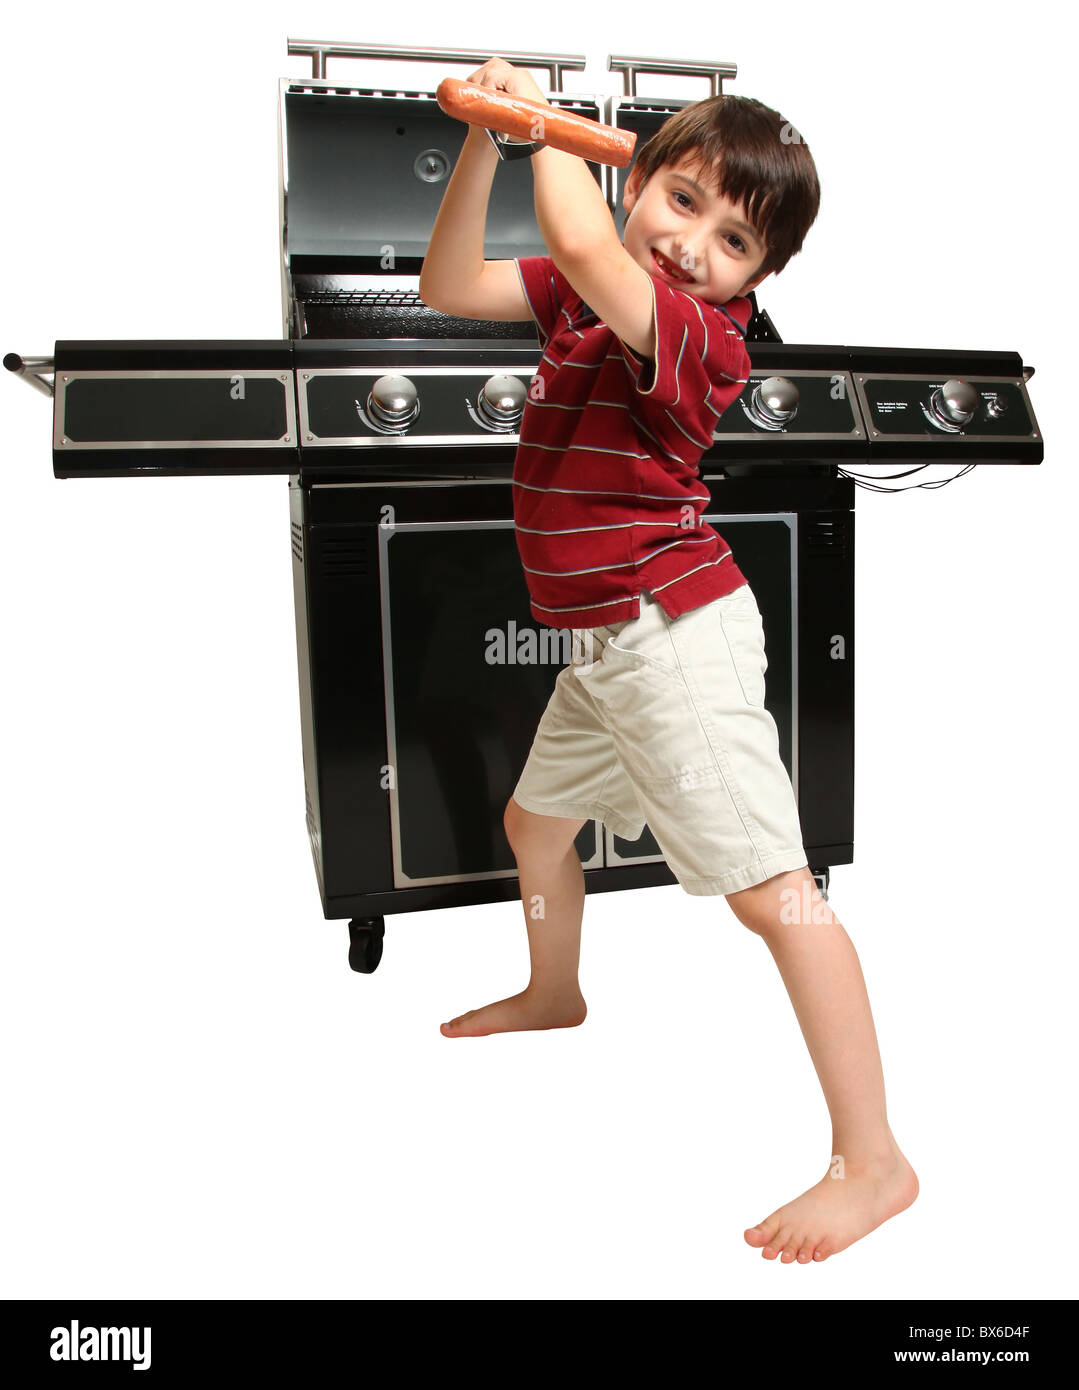 Adorable seven year old boy with grill utensils in front of large gas grill. Stock Photo